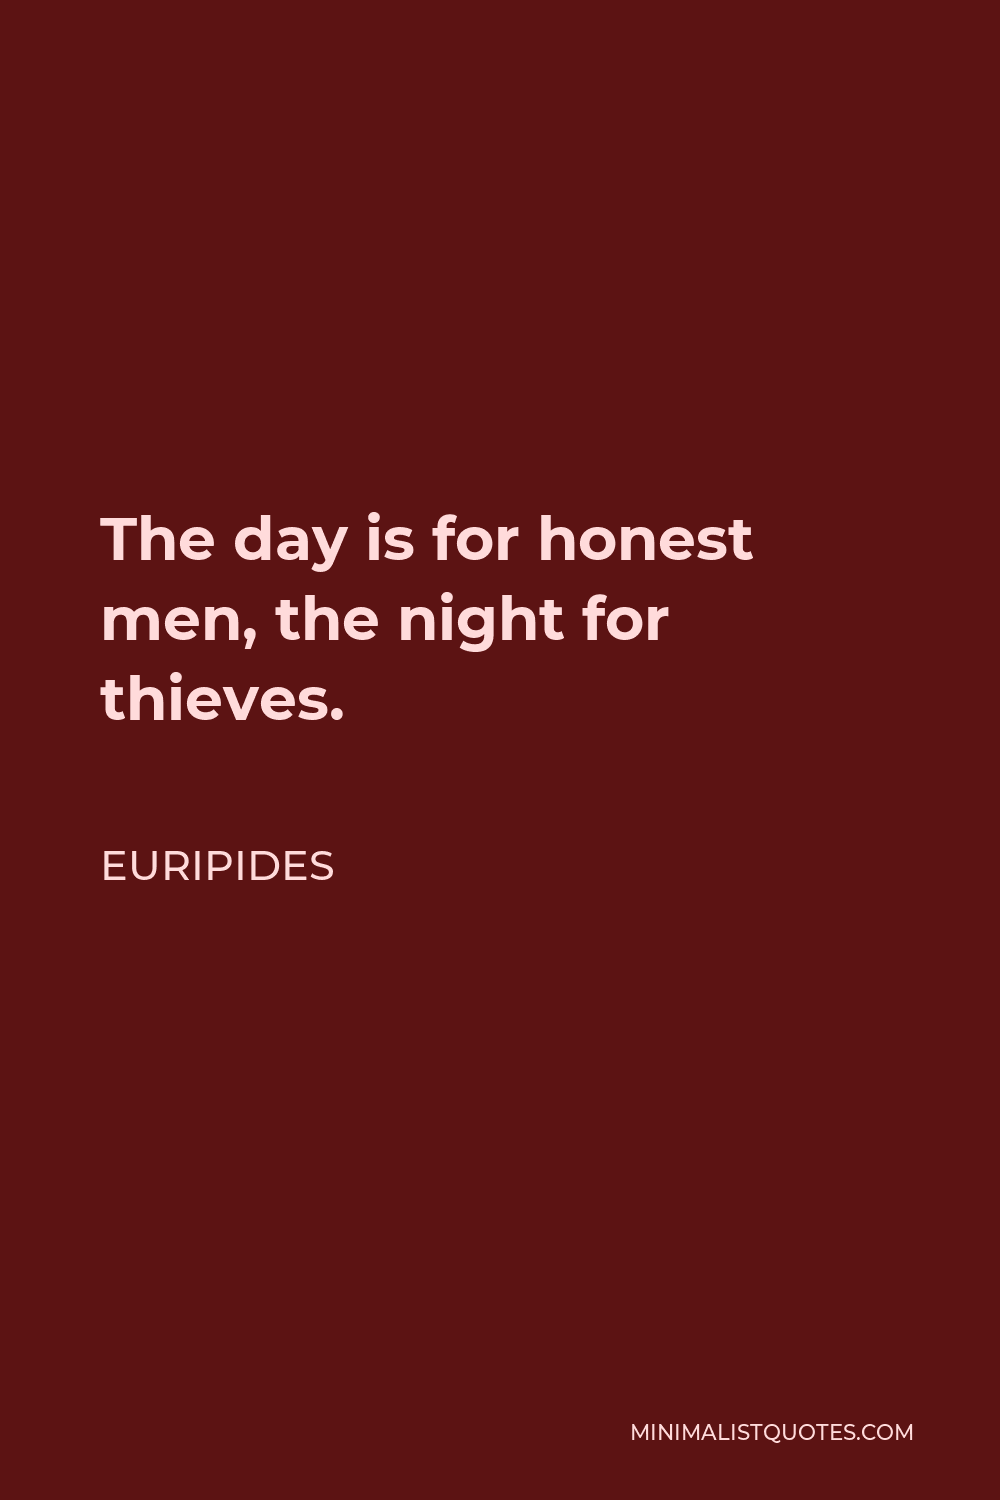 Euripides Quote - The day is for honest men, the night for thieves.